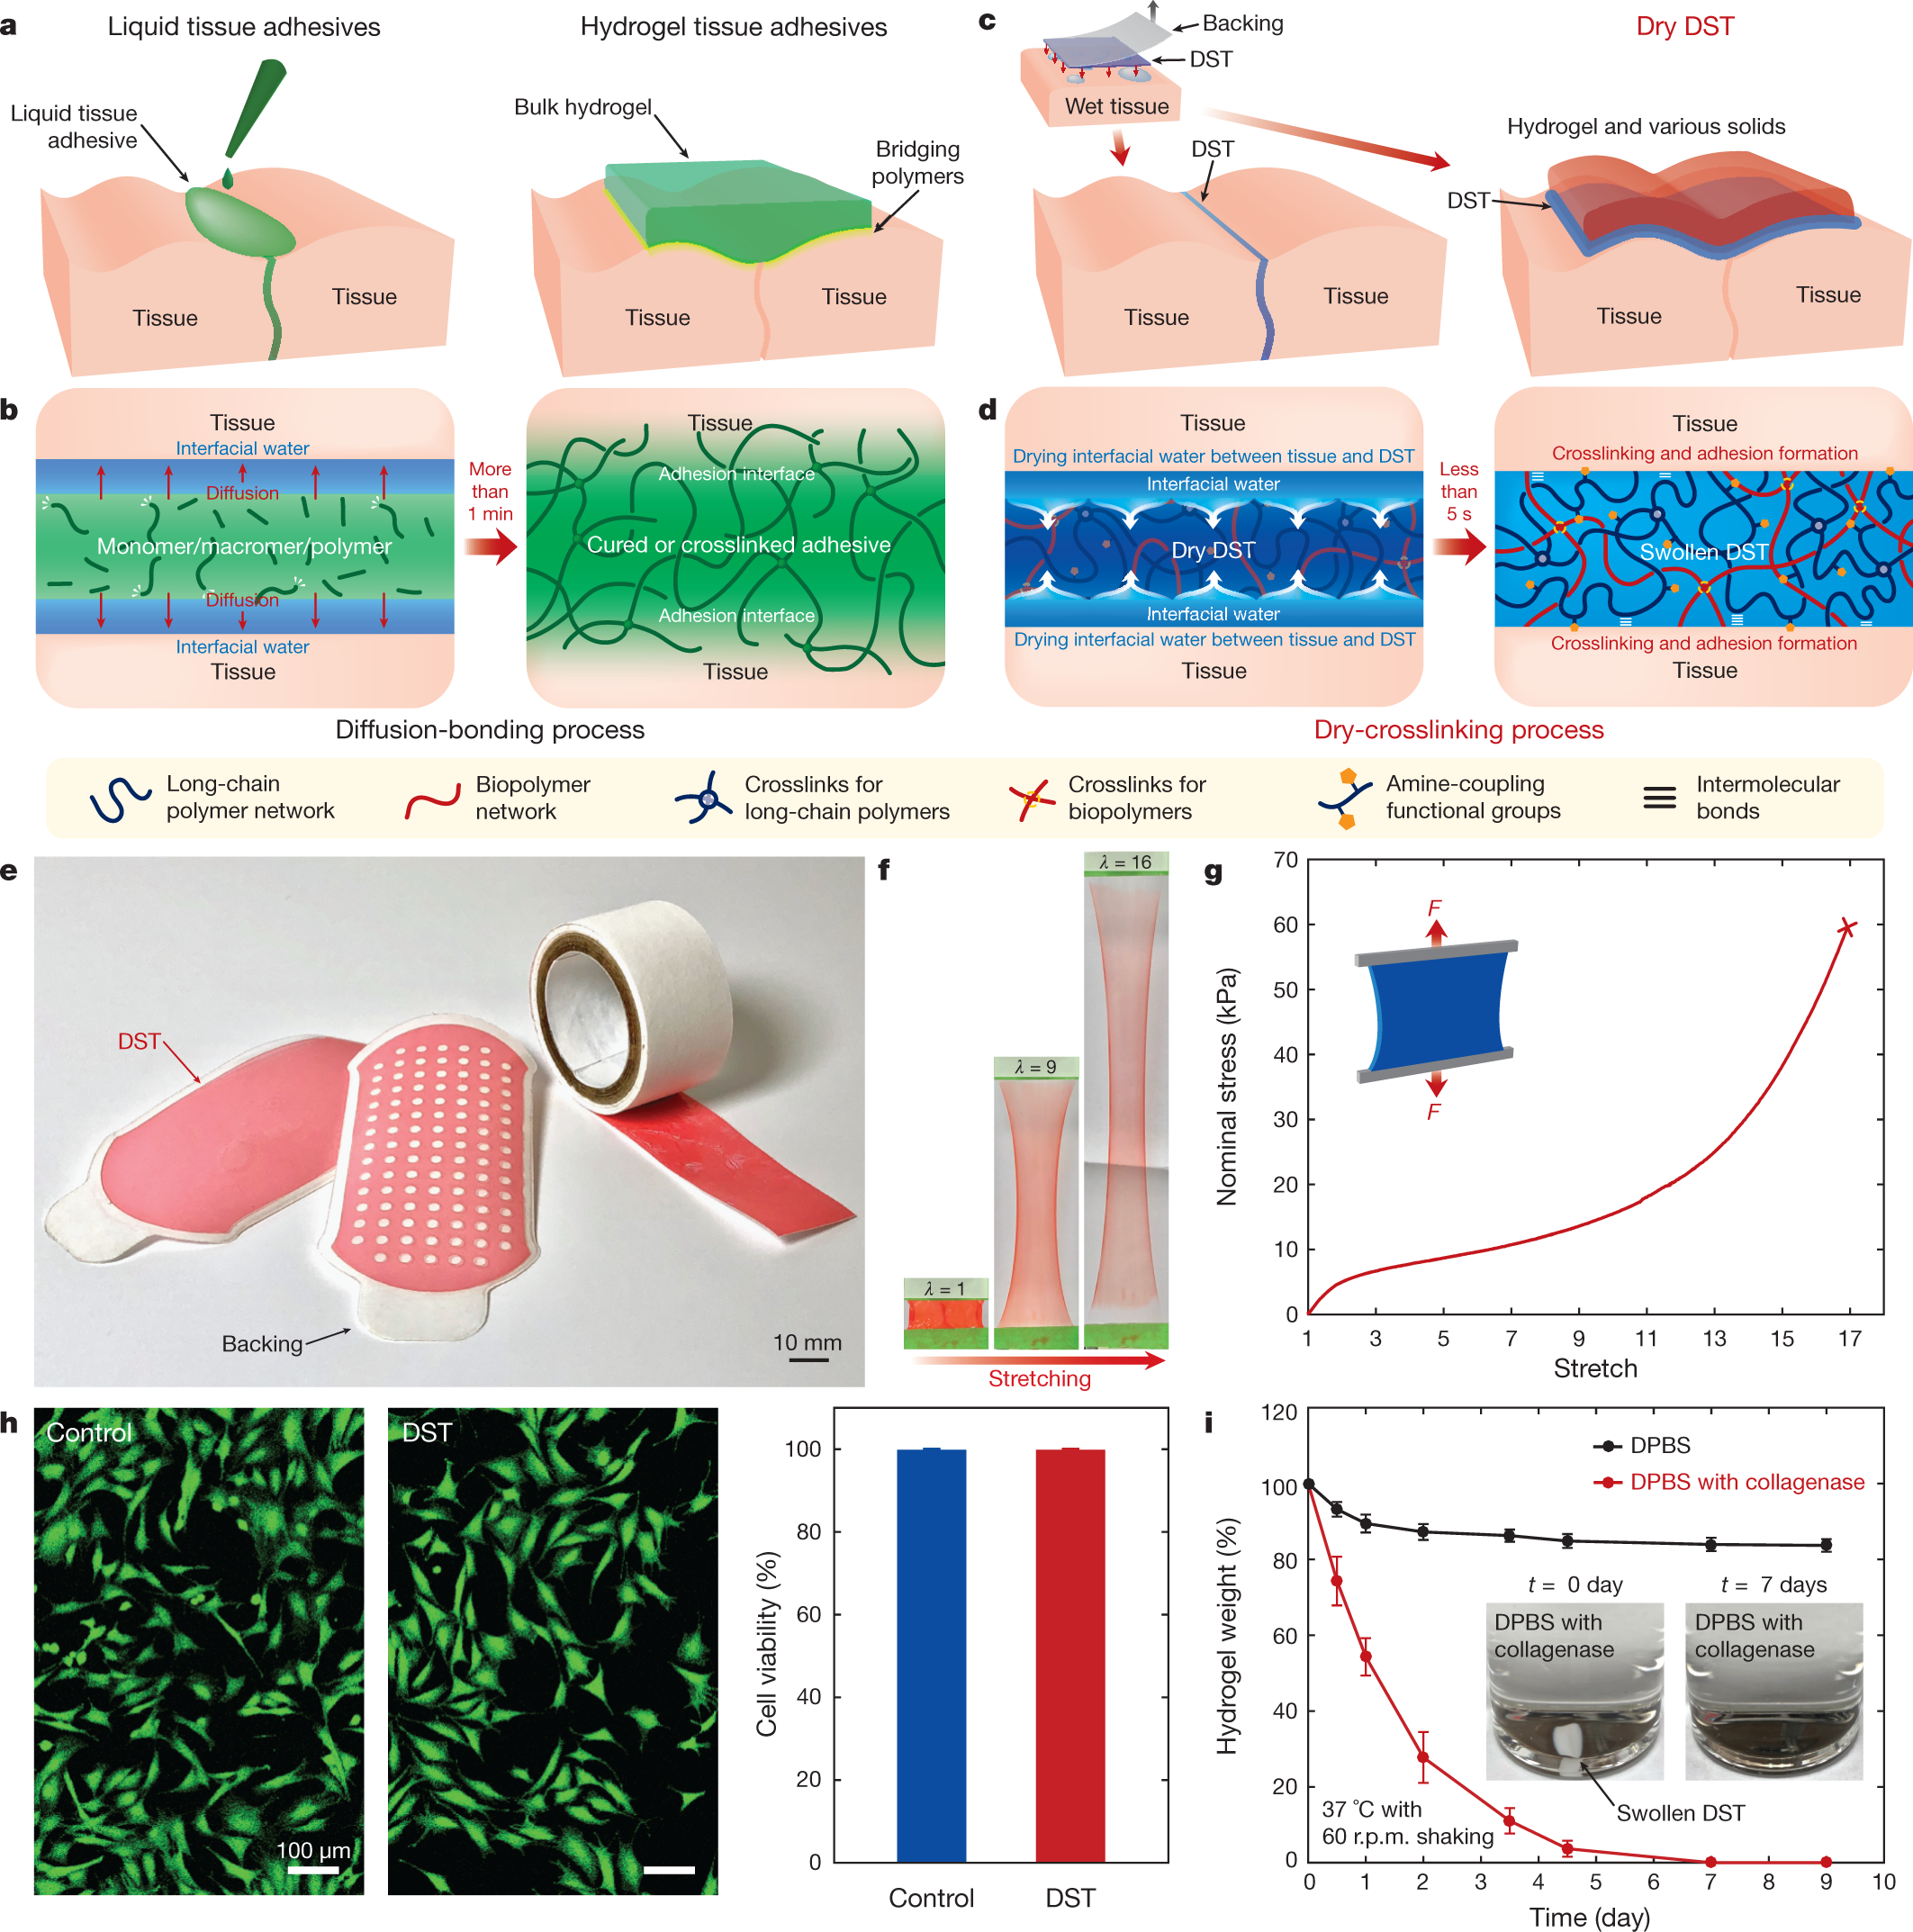 Dry double-sided tape for adhesion of wet tissues and devices | Nature